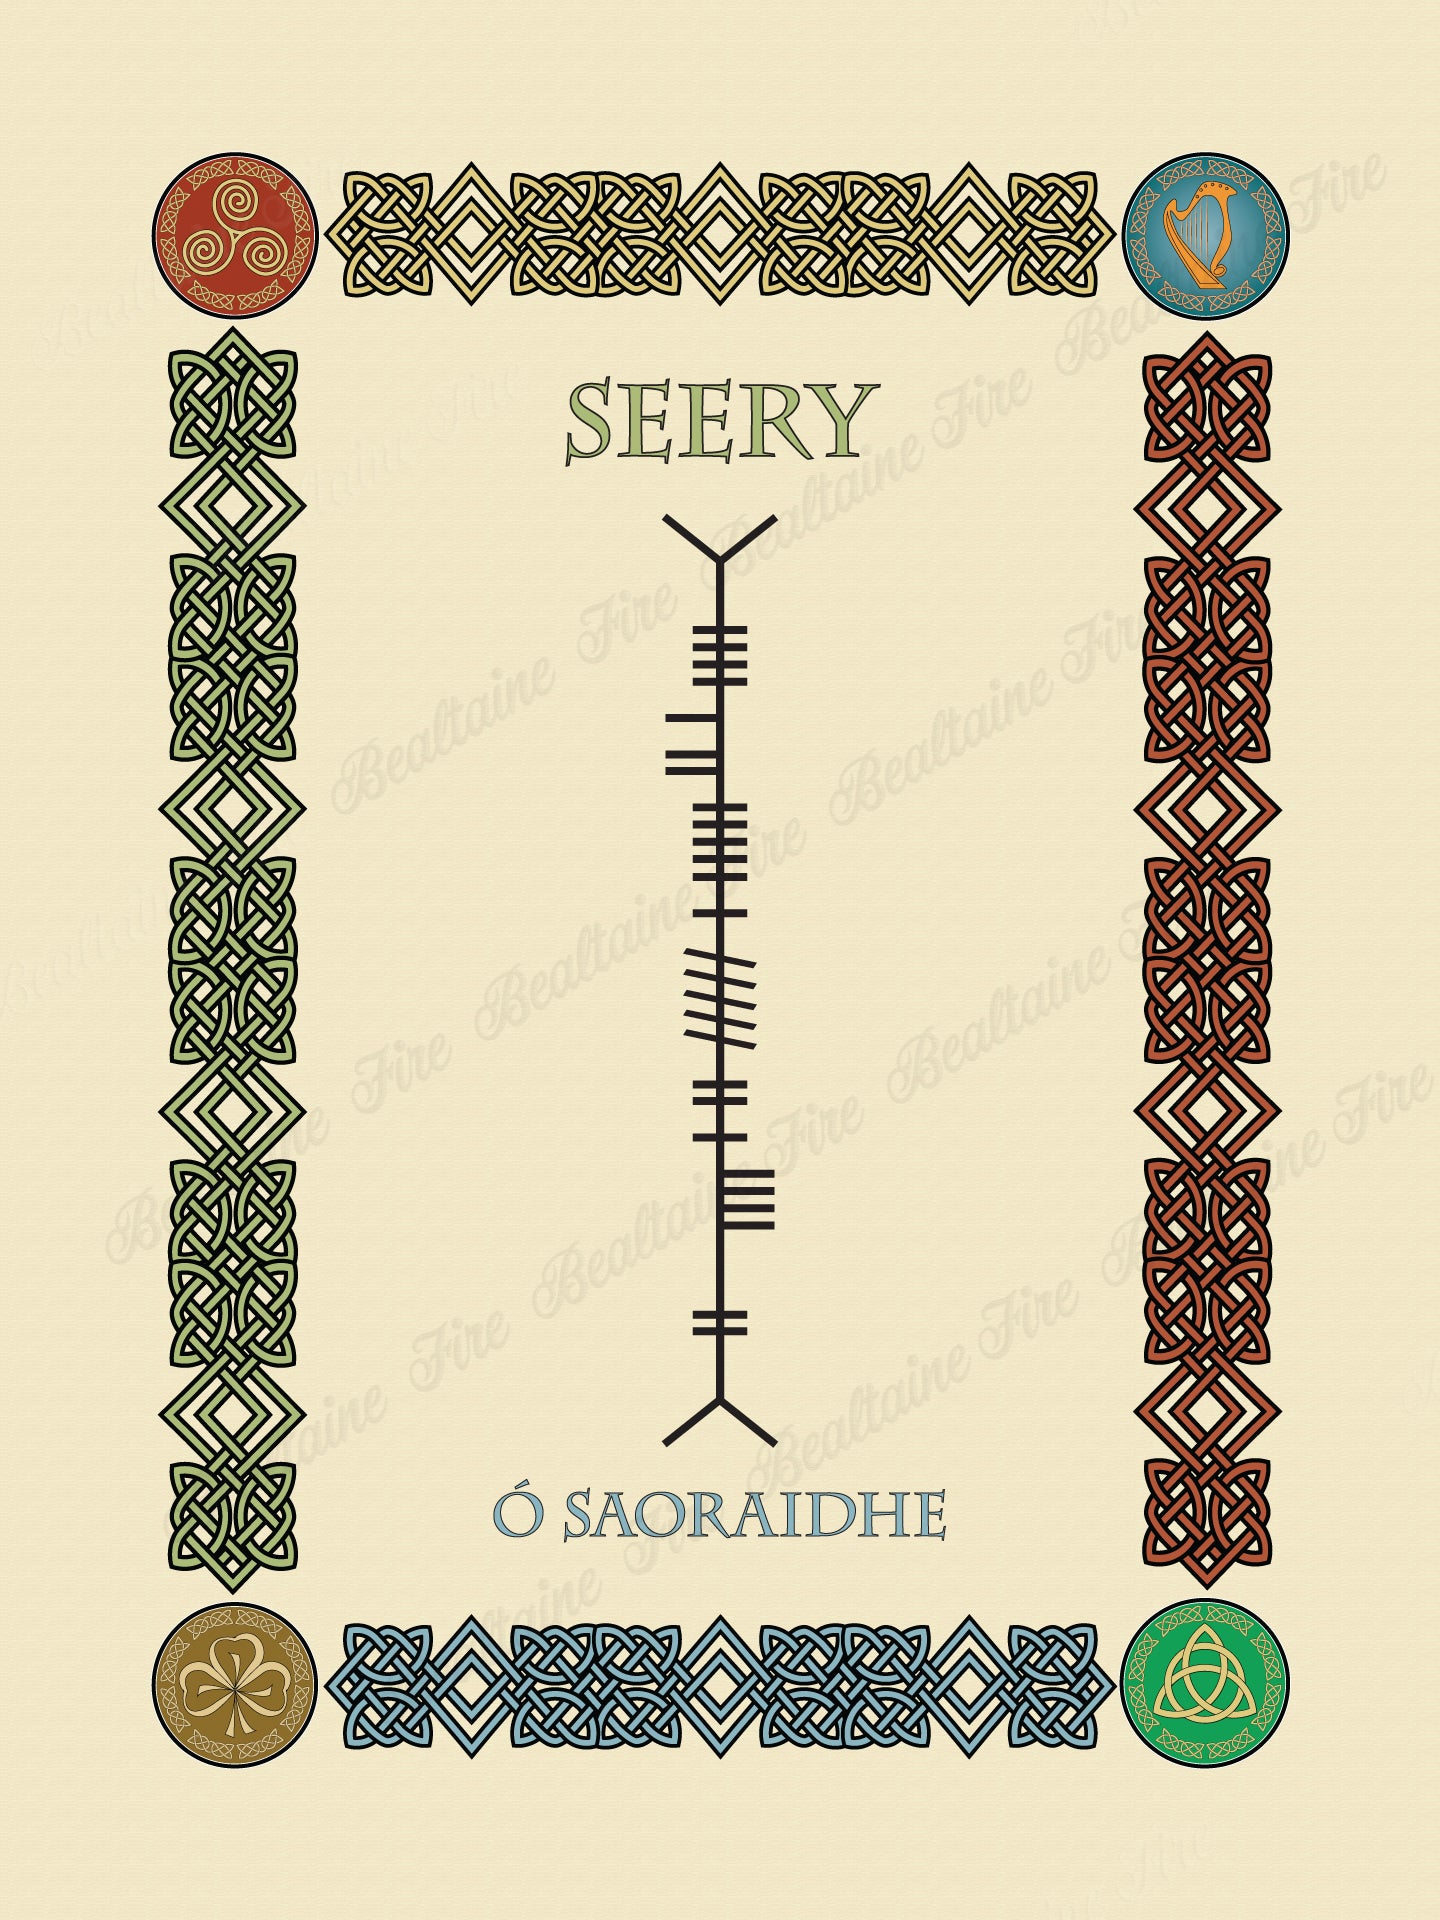 Seery in Old Irish and Ogham - PDF Download